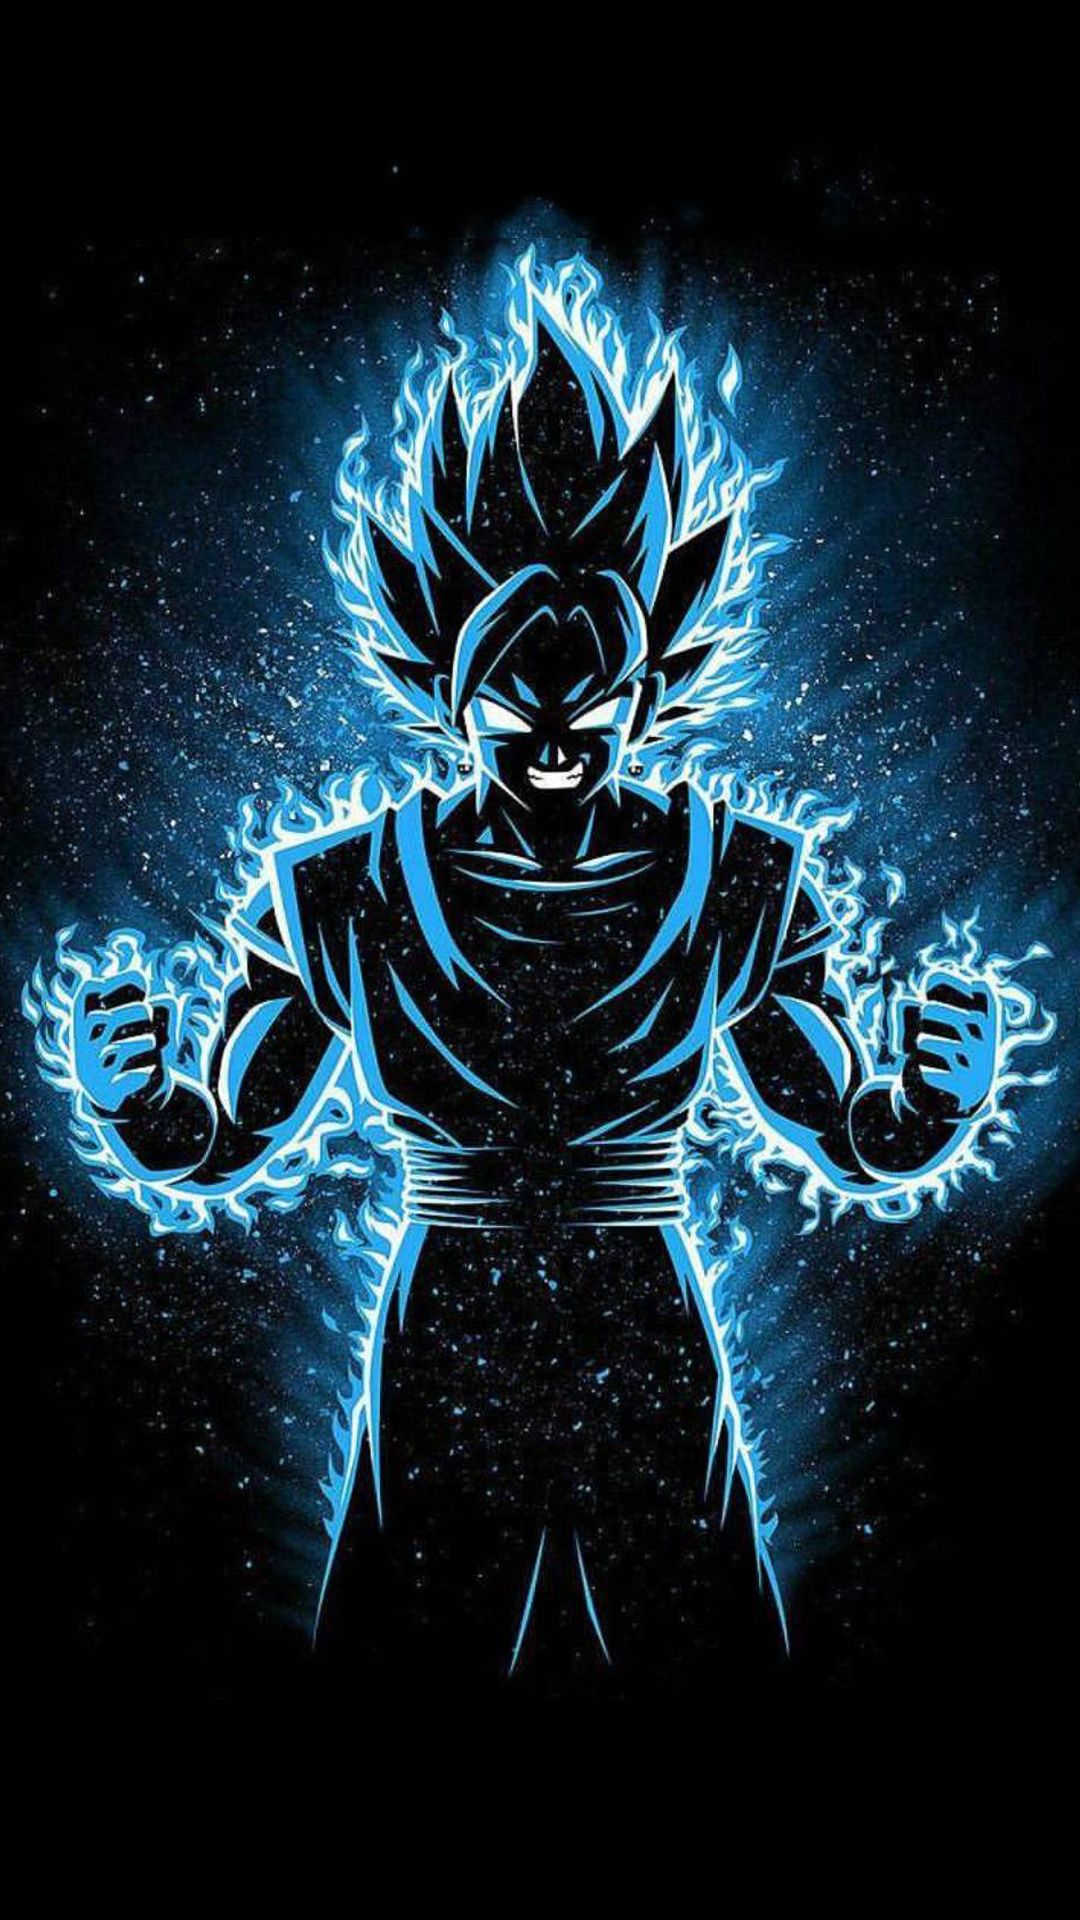 Download Dragon Ball Super wallpapers for mobile phone, free Dragon Ball  Super HD pictures